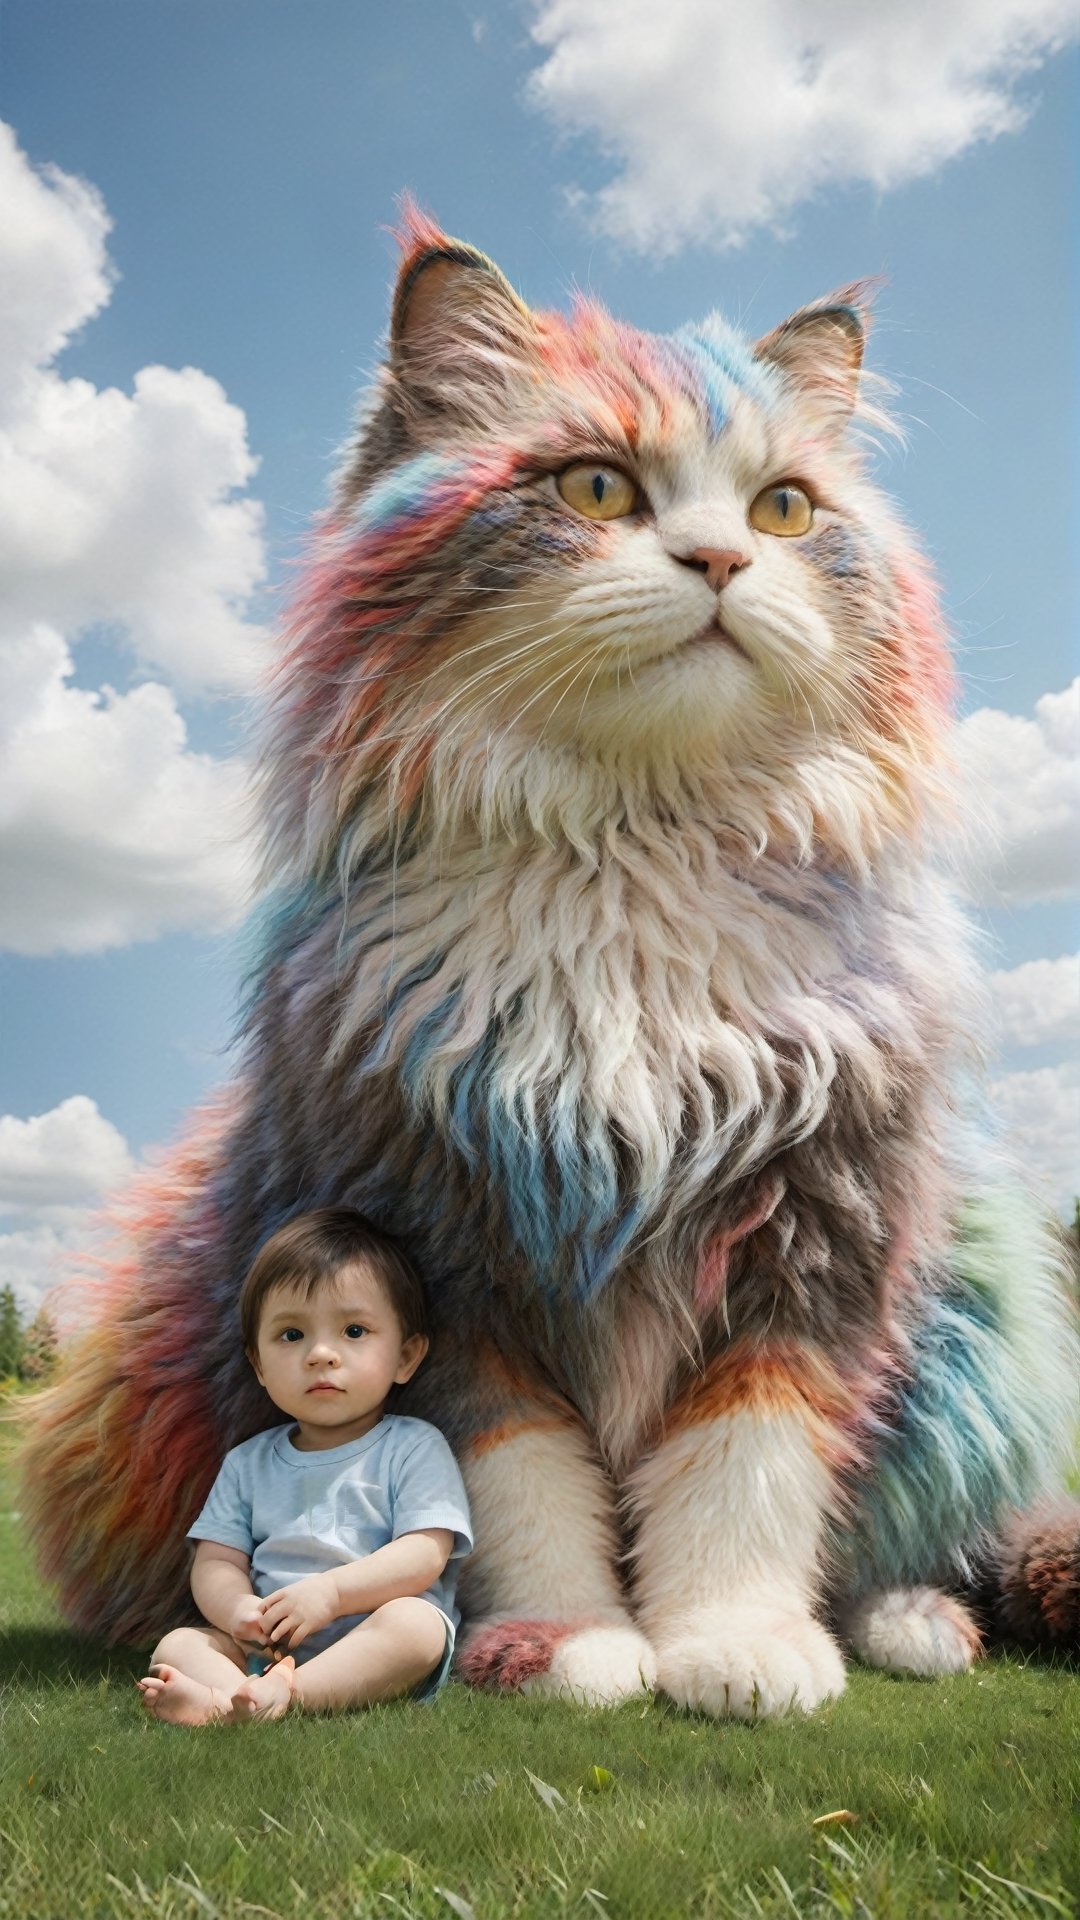 A multicolor giant cat with fluffy fur sitting on the grass, next to it sits an adorable babyboy (((looking at viewer))) . The blue sky has white clouds. In the style of hyper-realistic, high definition photography, movie stills, children's book illustrations, colorful animation stills, hyperrealistic details depict childlike innocence